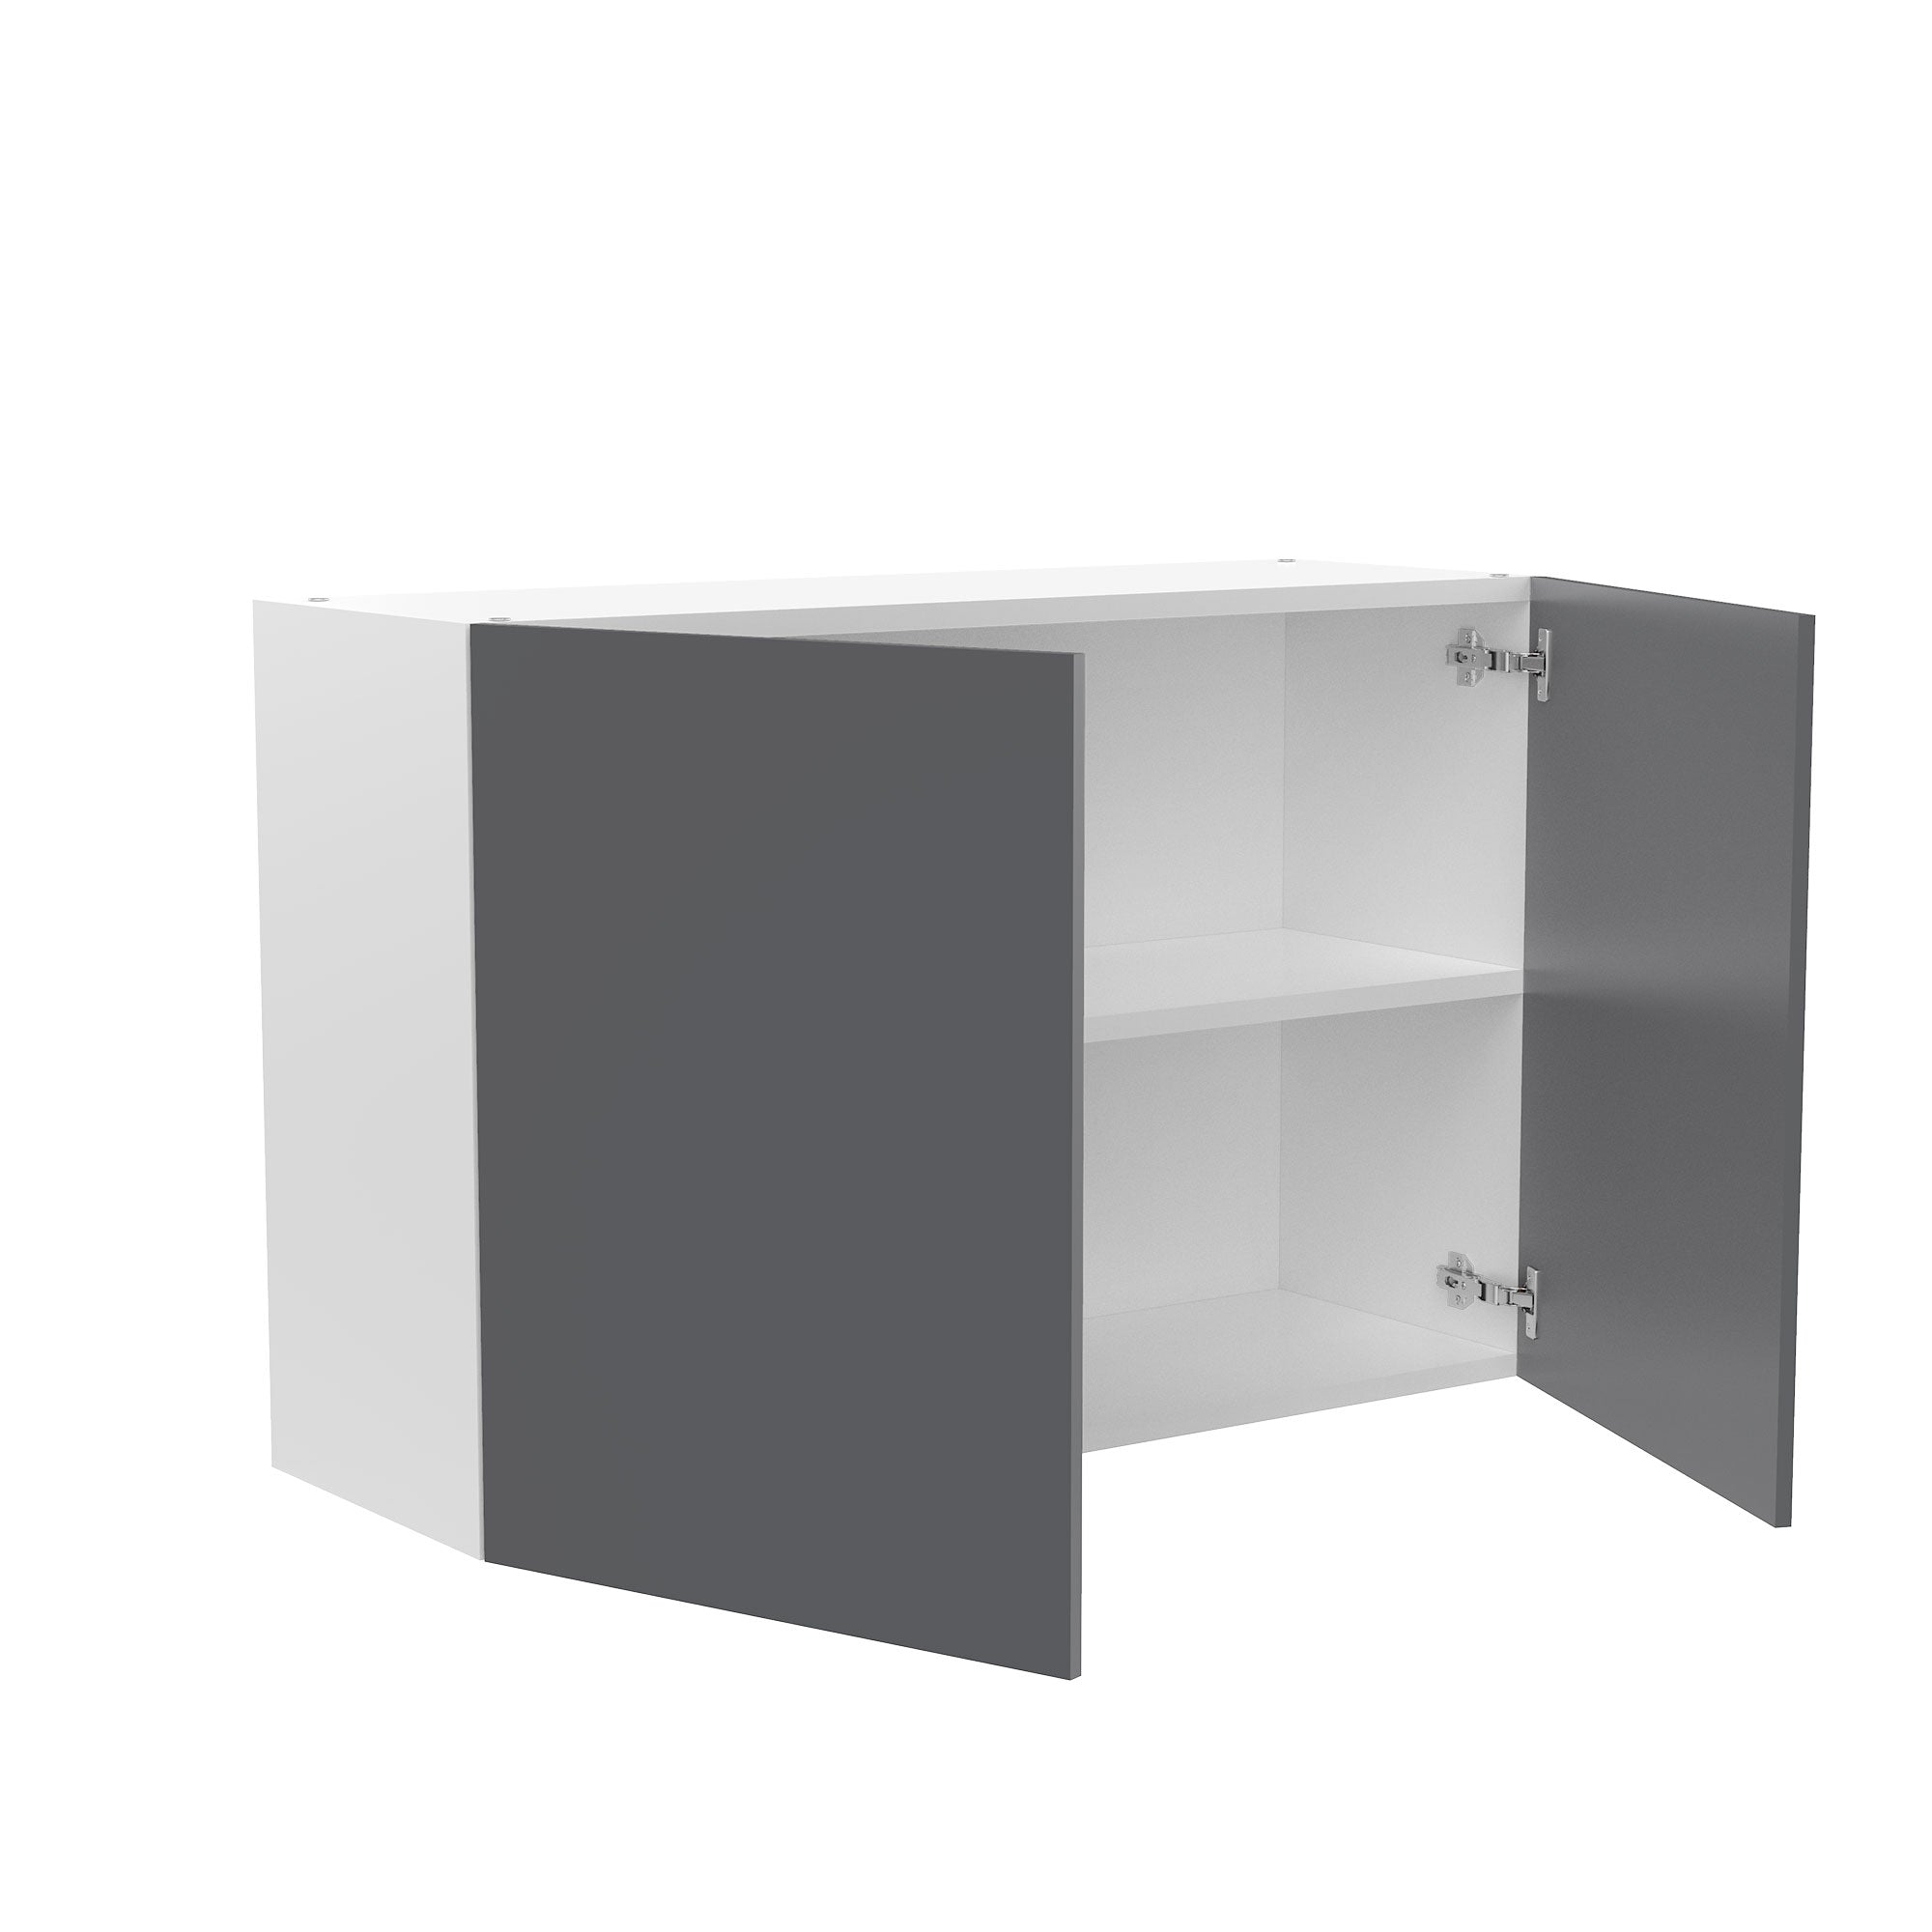 RTA - Glossy Grey - Double Door Wall Cabinets | 36"W x 24"H x 12"D